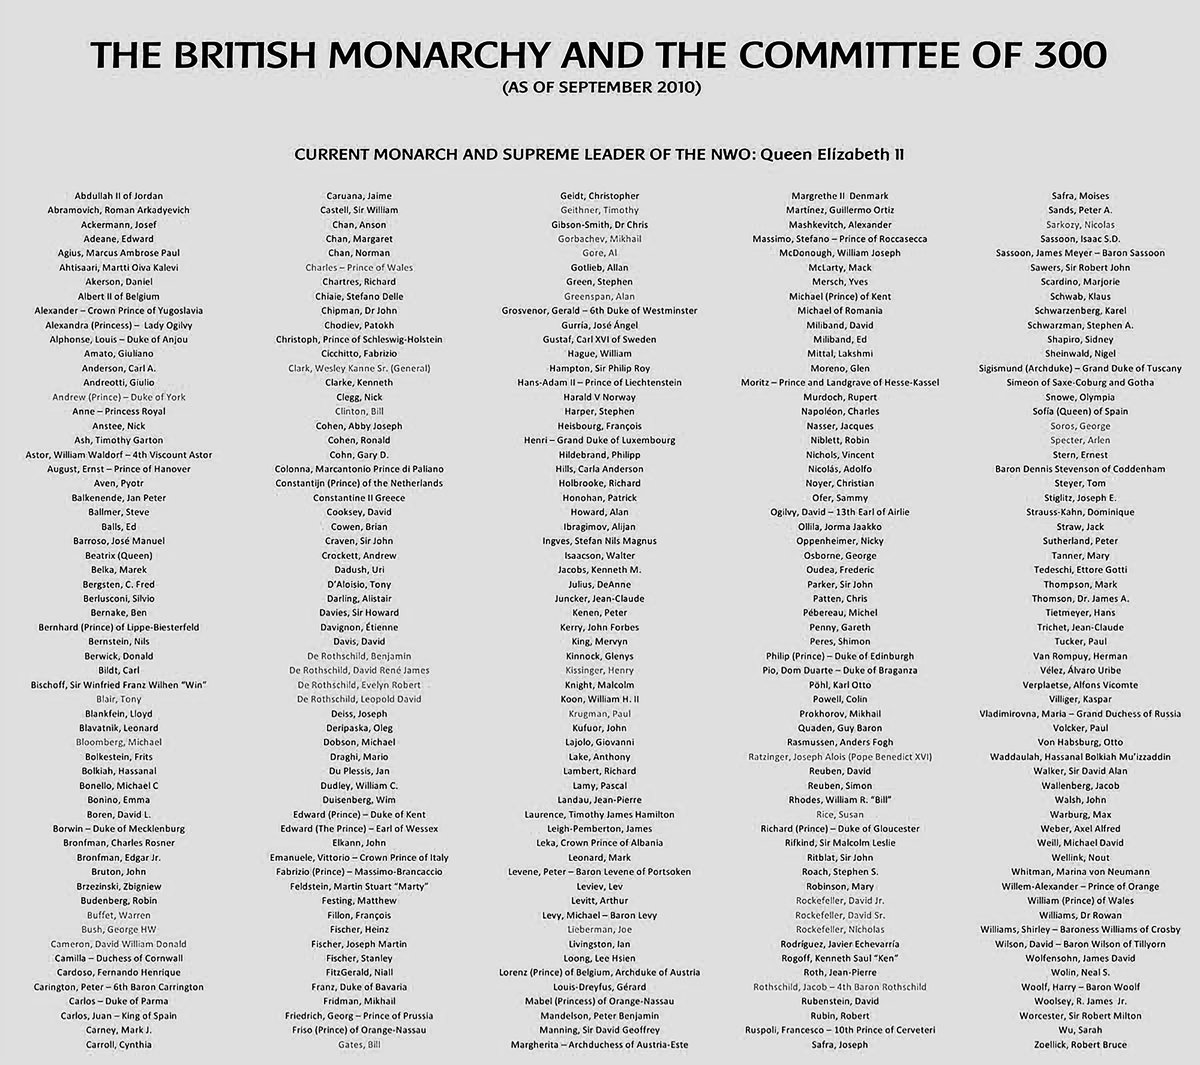 'The Committee Of 300', Or 'The Olympians', Was Founded By The British Aristocracy In 1727. It Consists Of Exactly 300 Members At Any Given Time. Its Sole Purpose Is Organizing Politics, Commerce, Banking, Media, And The Military For The Centralized Global Efforts.